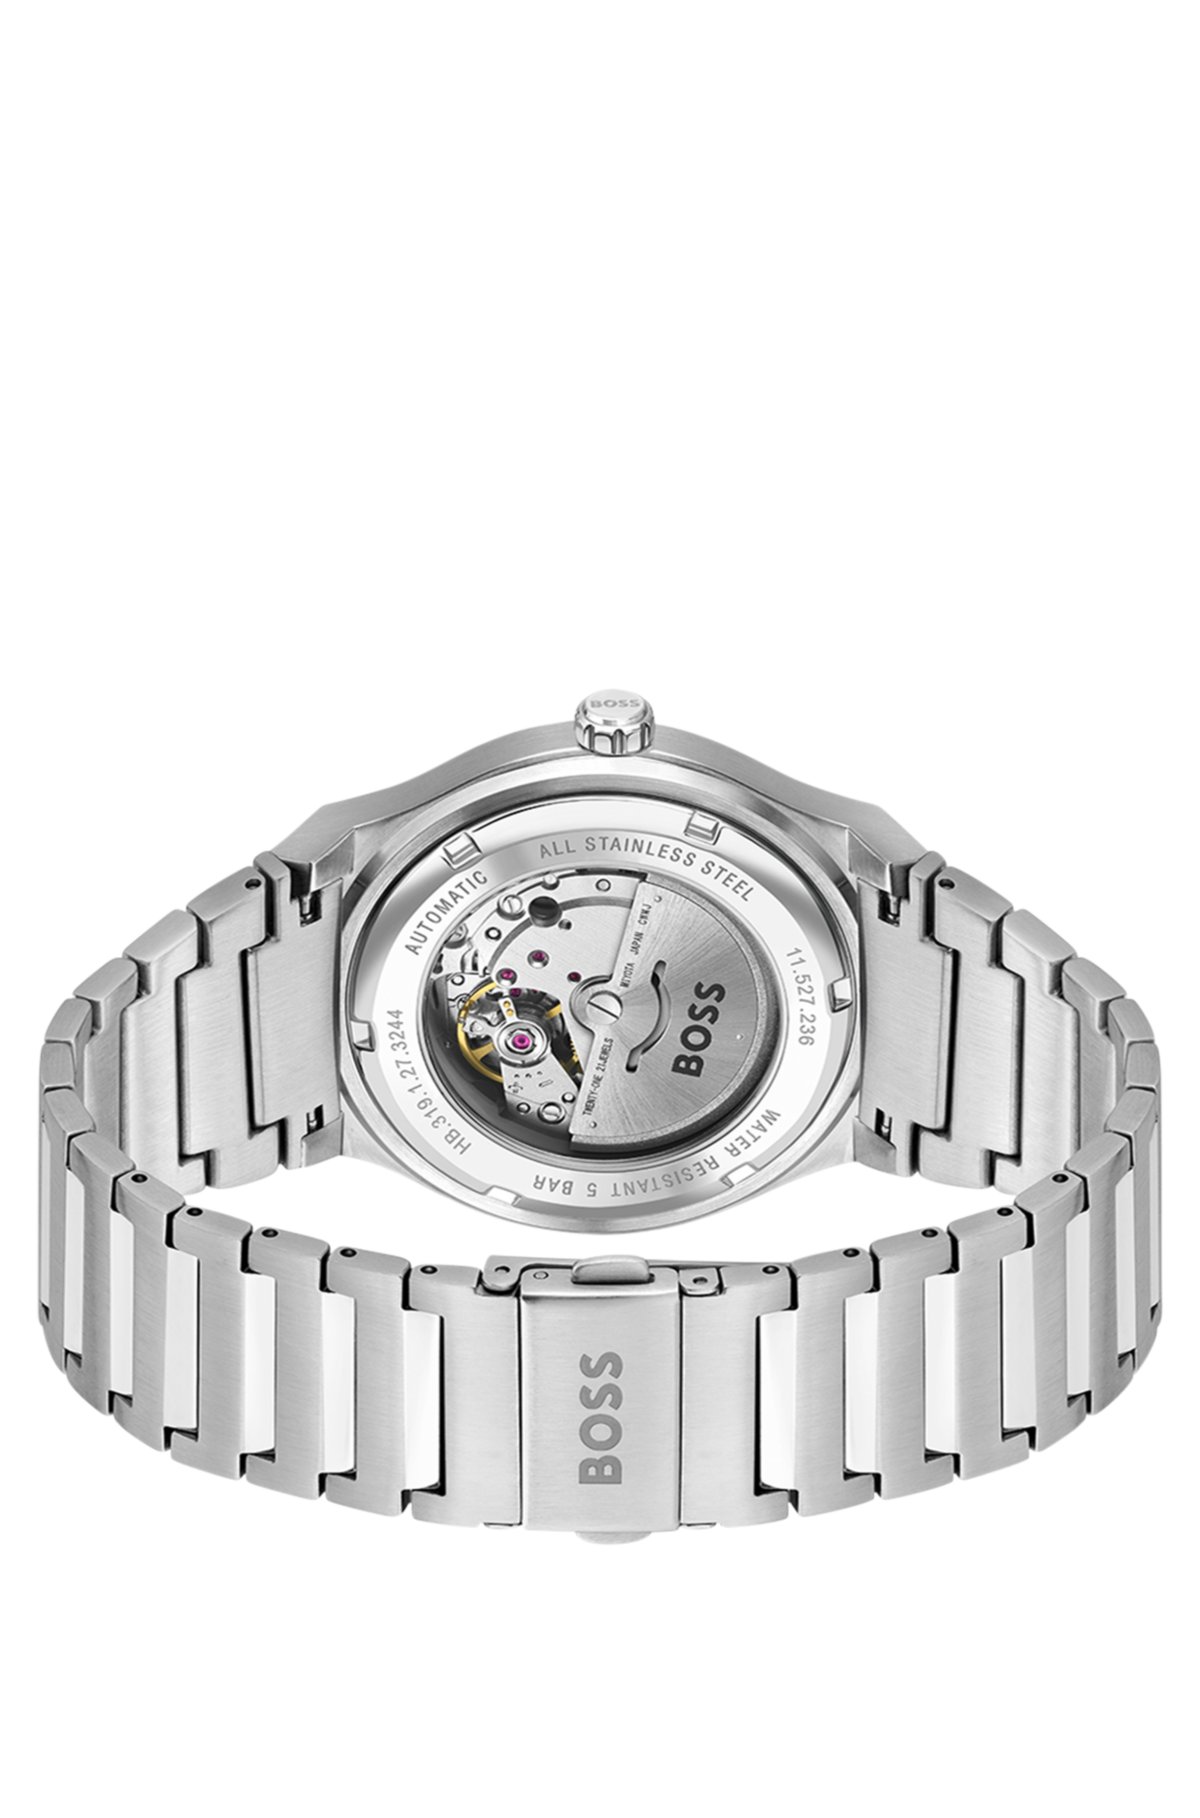 BOSS - Link-bracelet automatic watch groove-textured dial with